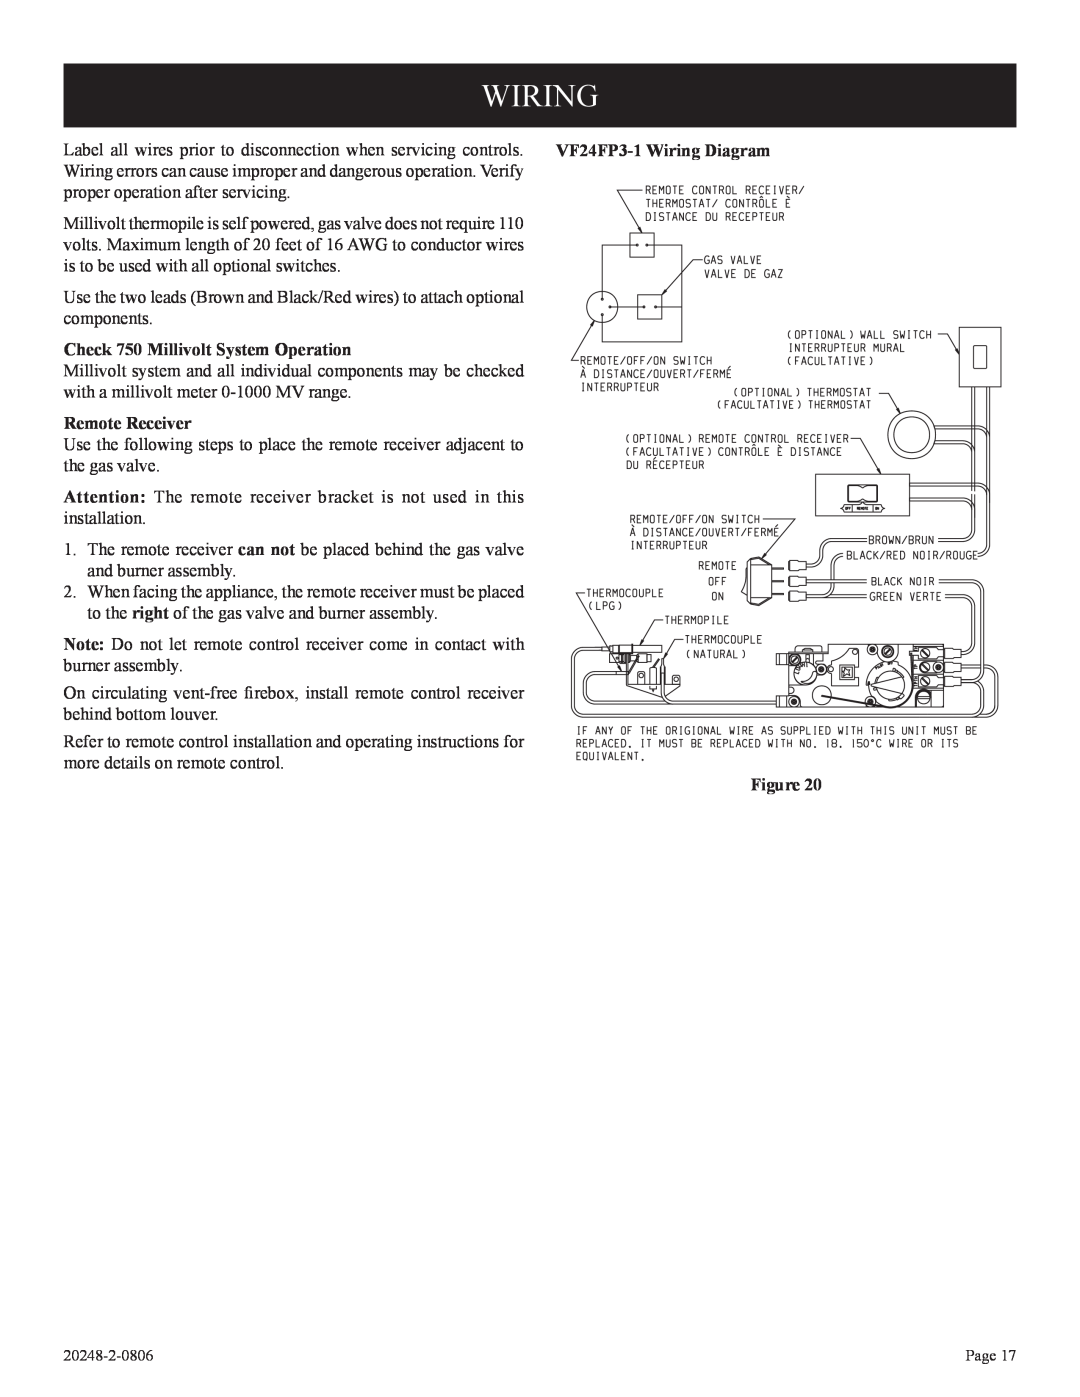 Empire Comfort Systems VF24FP2-1 VF24FP3-1Wiring Diagram, Check 750 Millivolt System Operation, Remote Receiver 